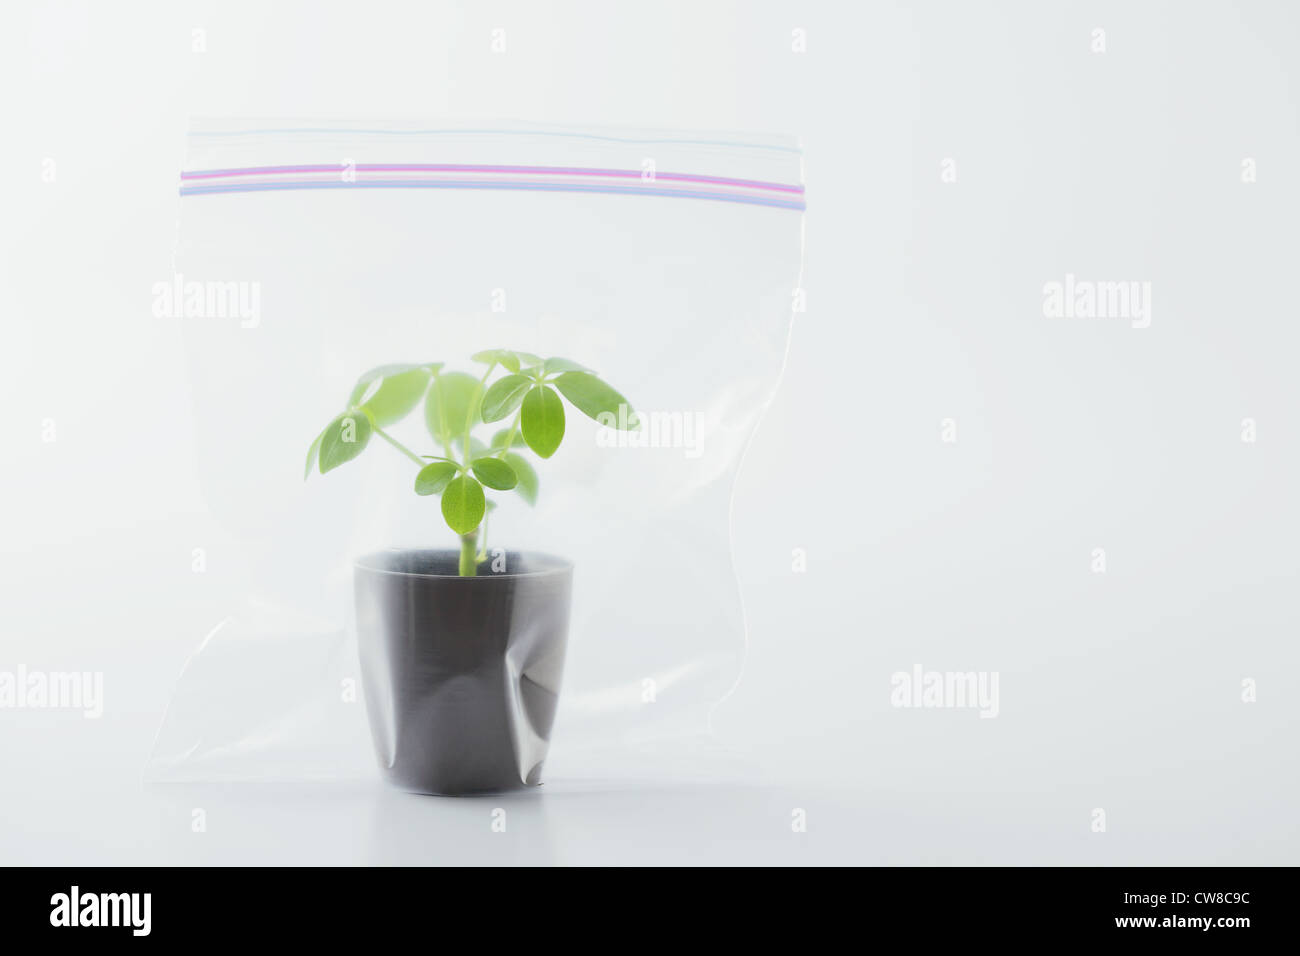 Potted Plant In Plastic Bag Stock Photo